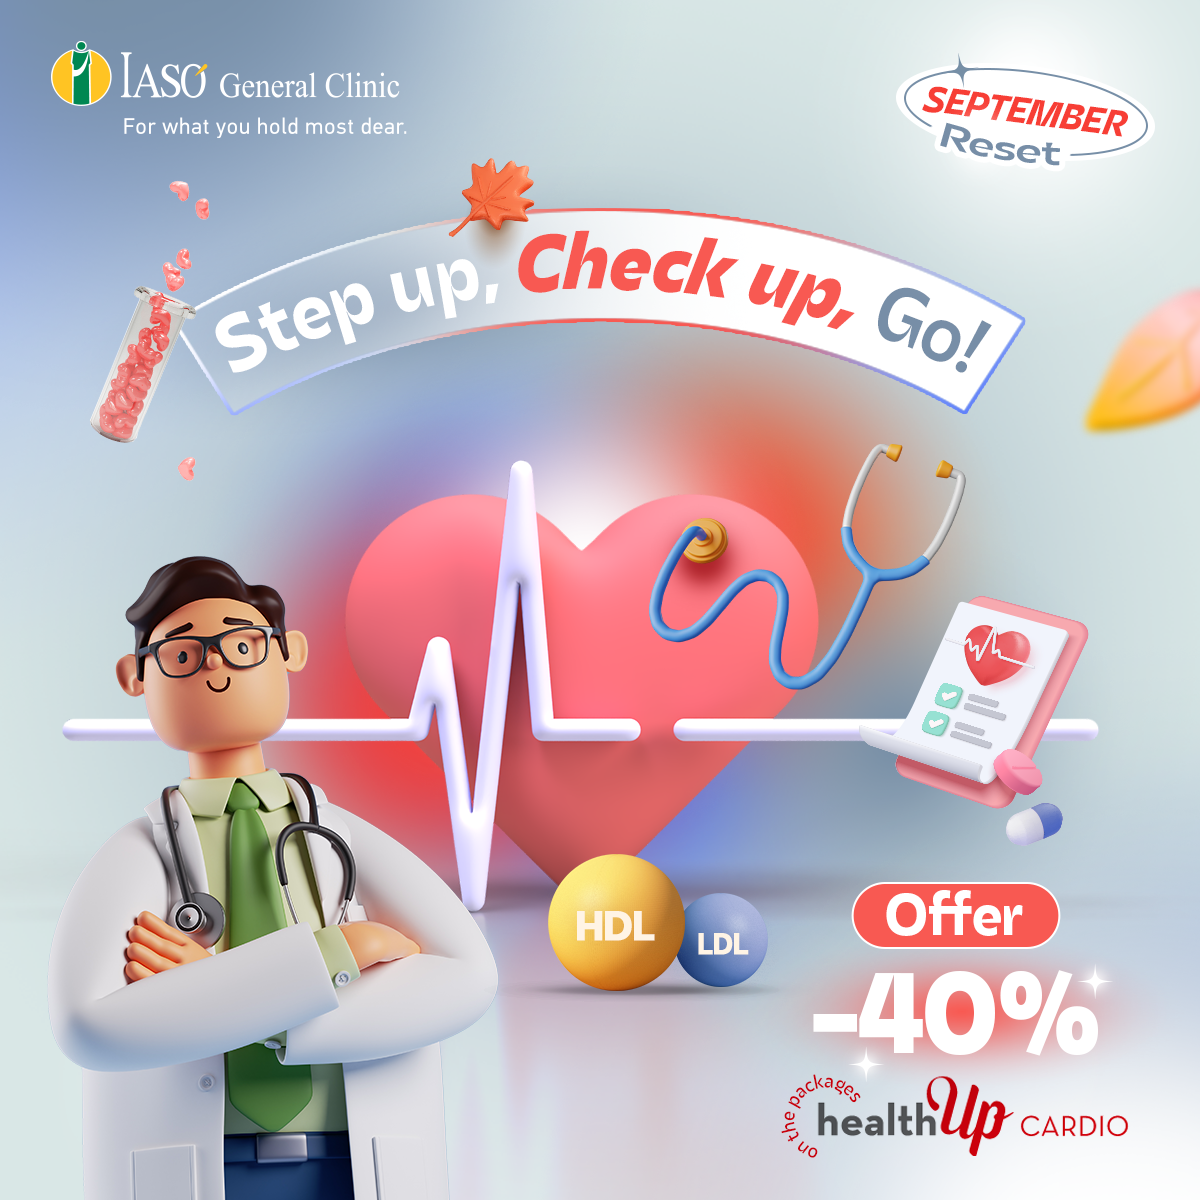 IASO General Clinic: 40% discount on the healthUp CARDIO packages on the occasion of World Heart Day